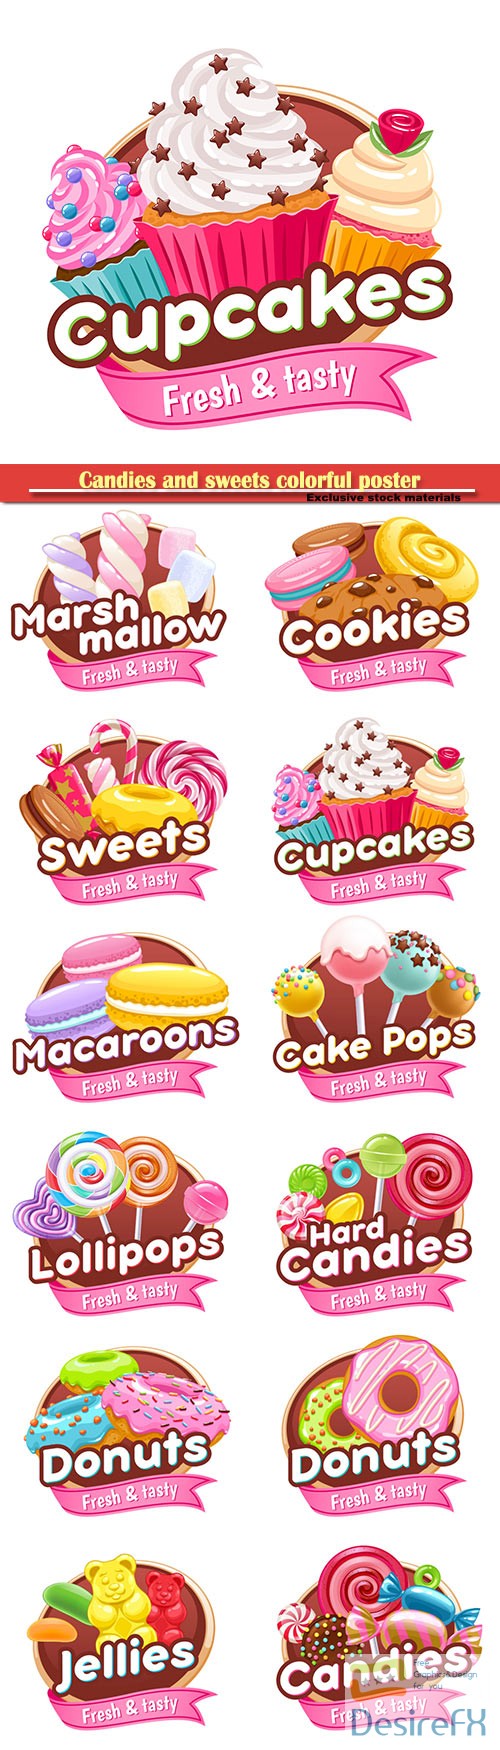 Candies and sweets colorful poster, donut, cookie, marshmallow, candy cane, lollipop